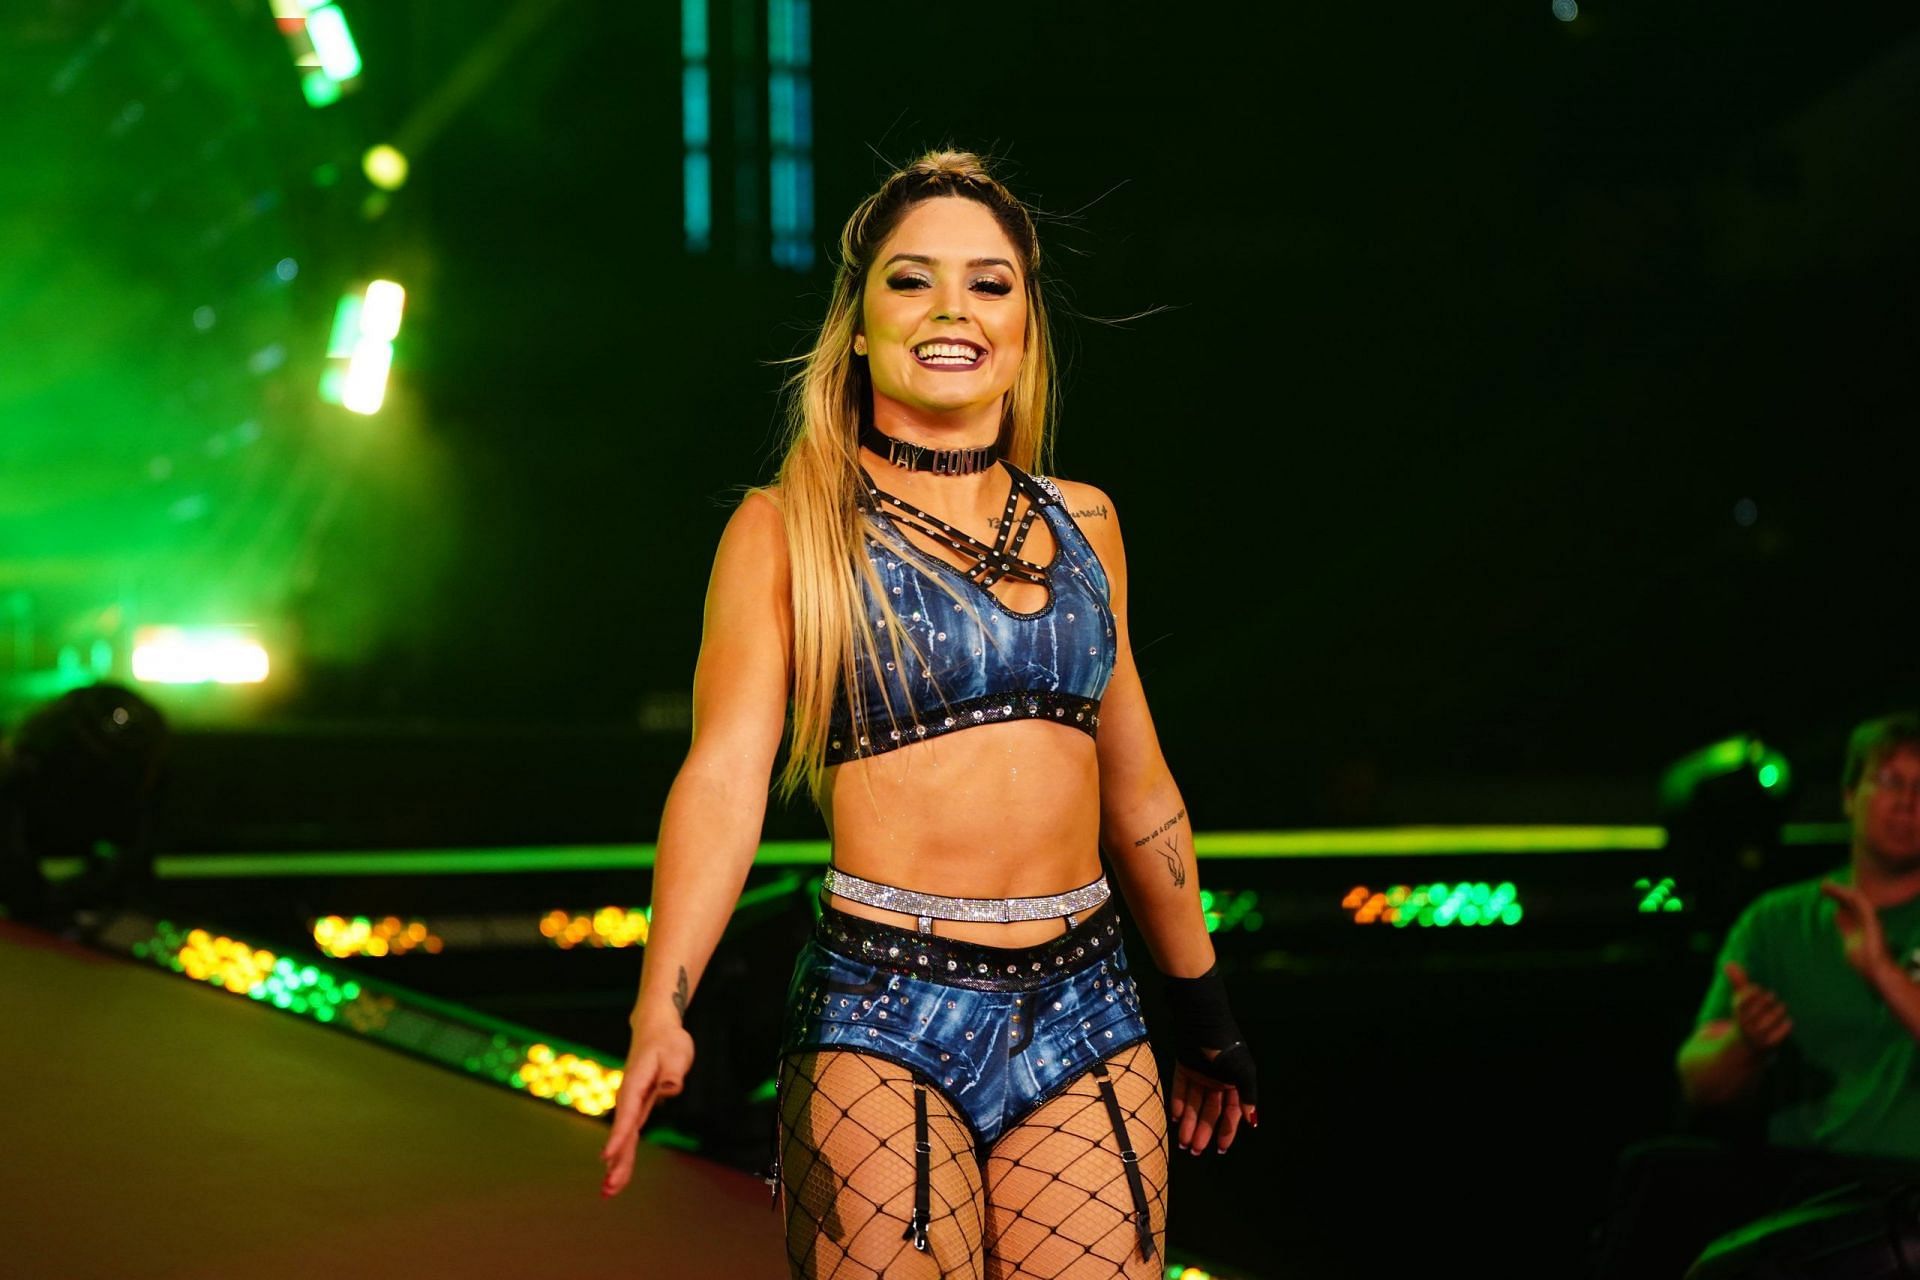 The former NXT star has shined in her new role